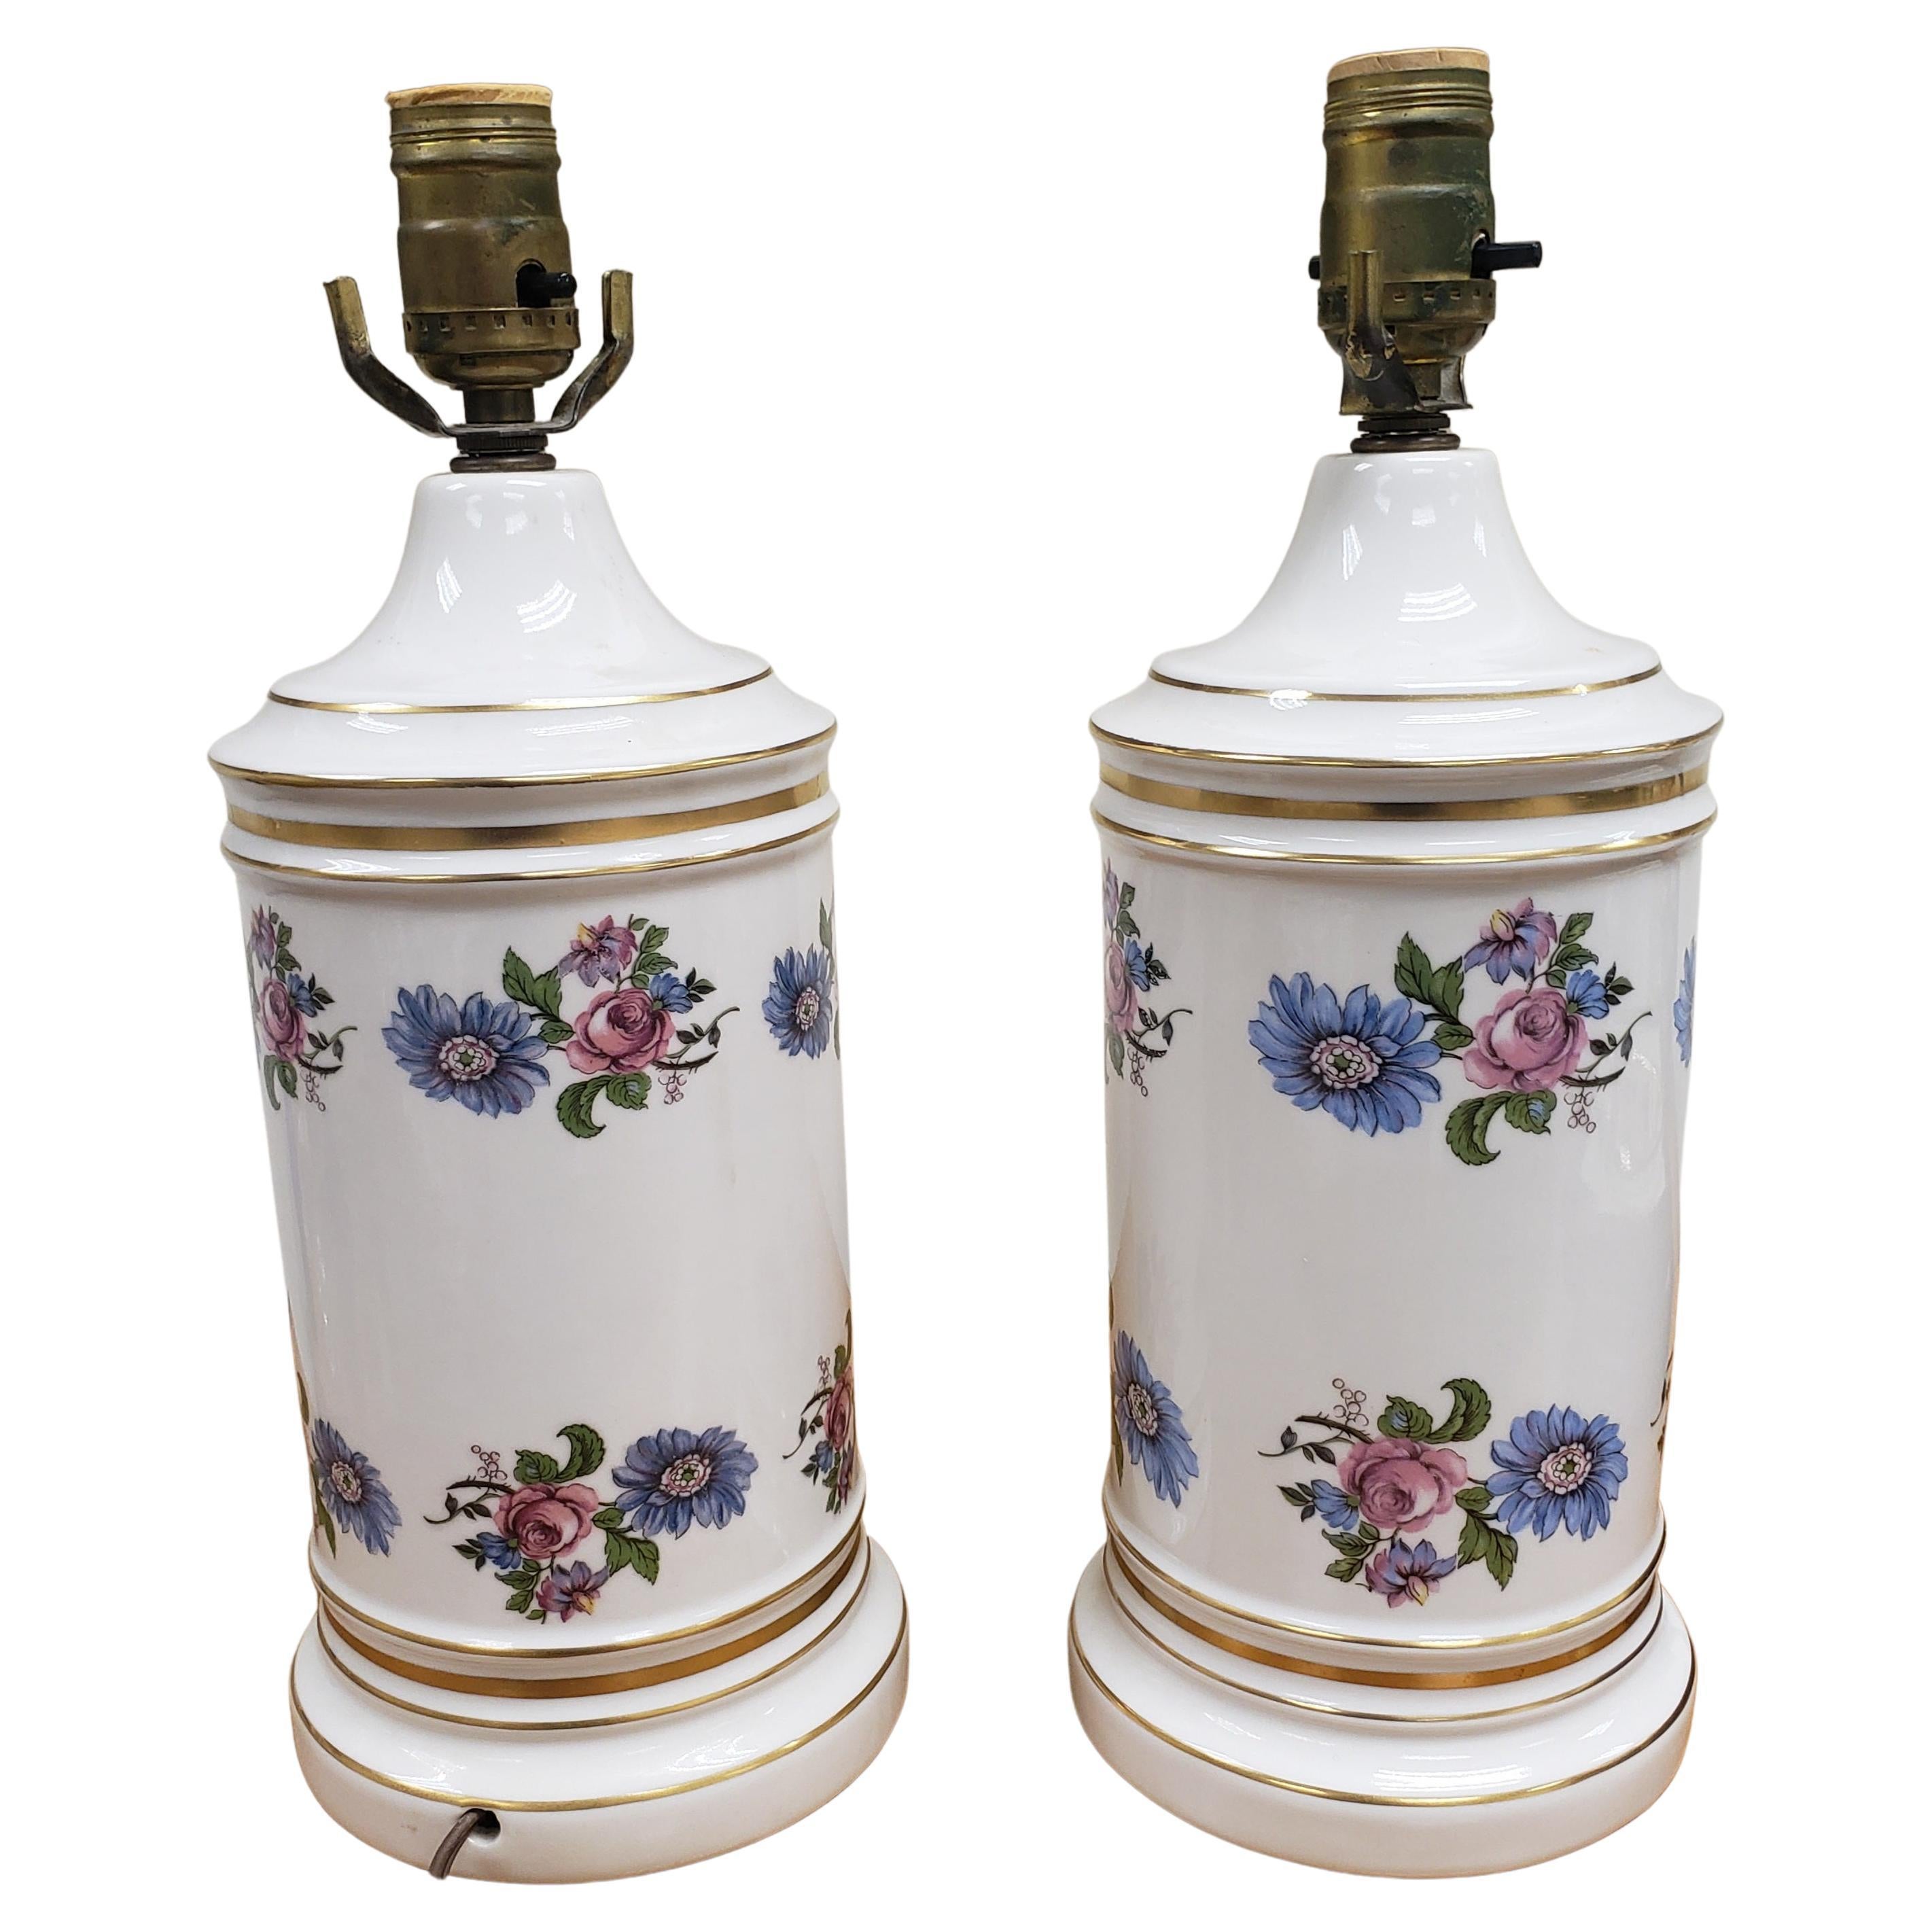 Oriental porcelain gold trim and flower painted ginger jar table lamps, a Pair.
Very good vintage condition. 
Measure 5.75